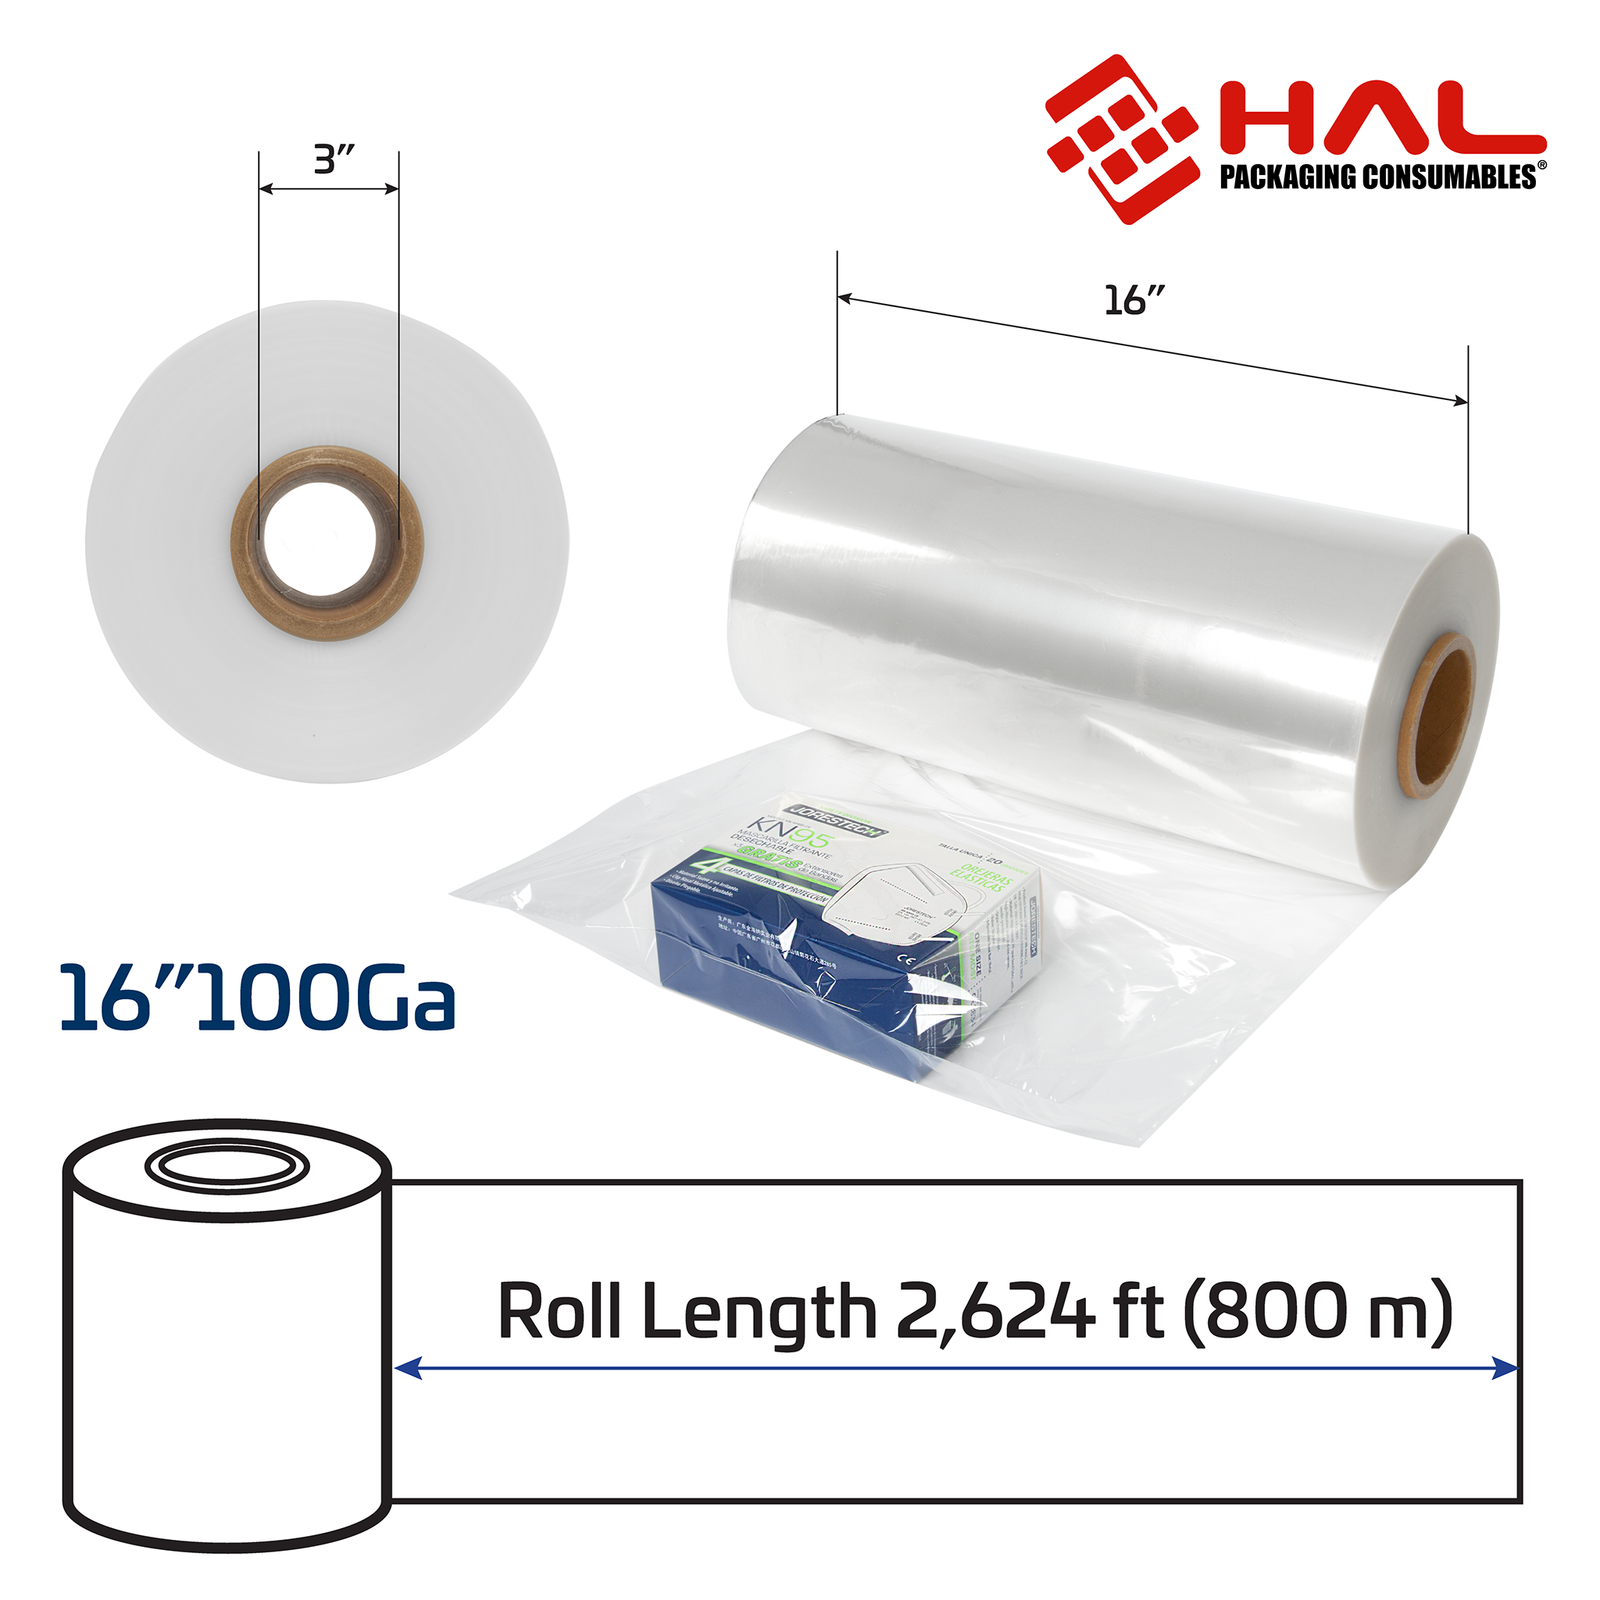 Measurements of the 100 gauge shrink wrapping film tube. 3 inch diameter of the inner core, and 16 inch width with a 2,624 ft. length (800 meters).